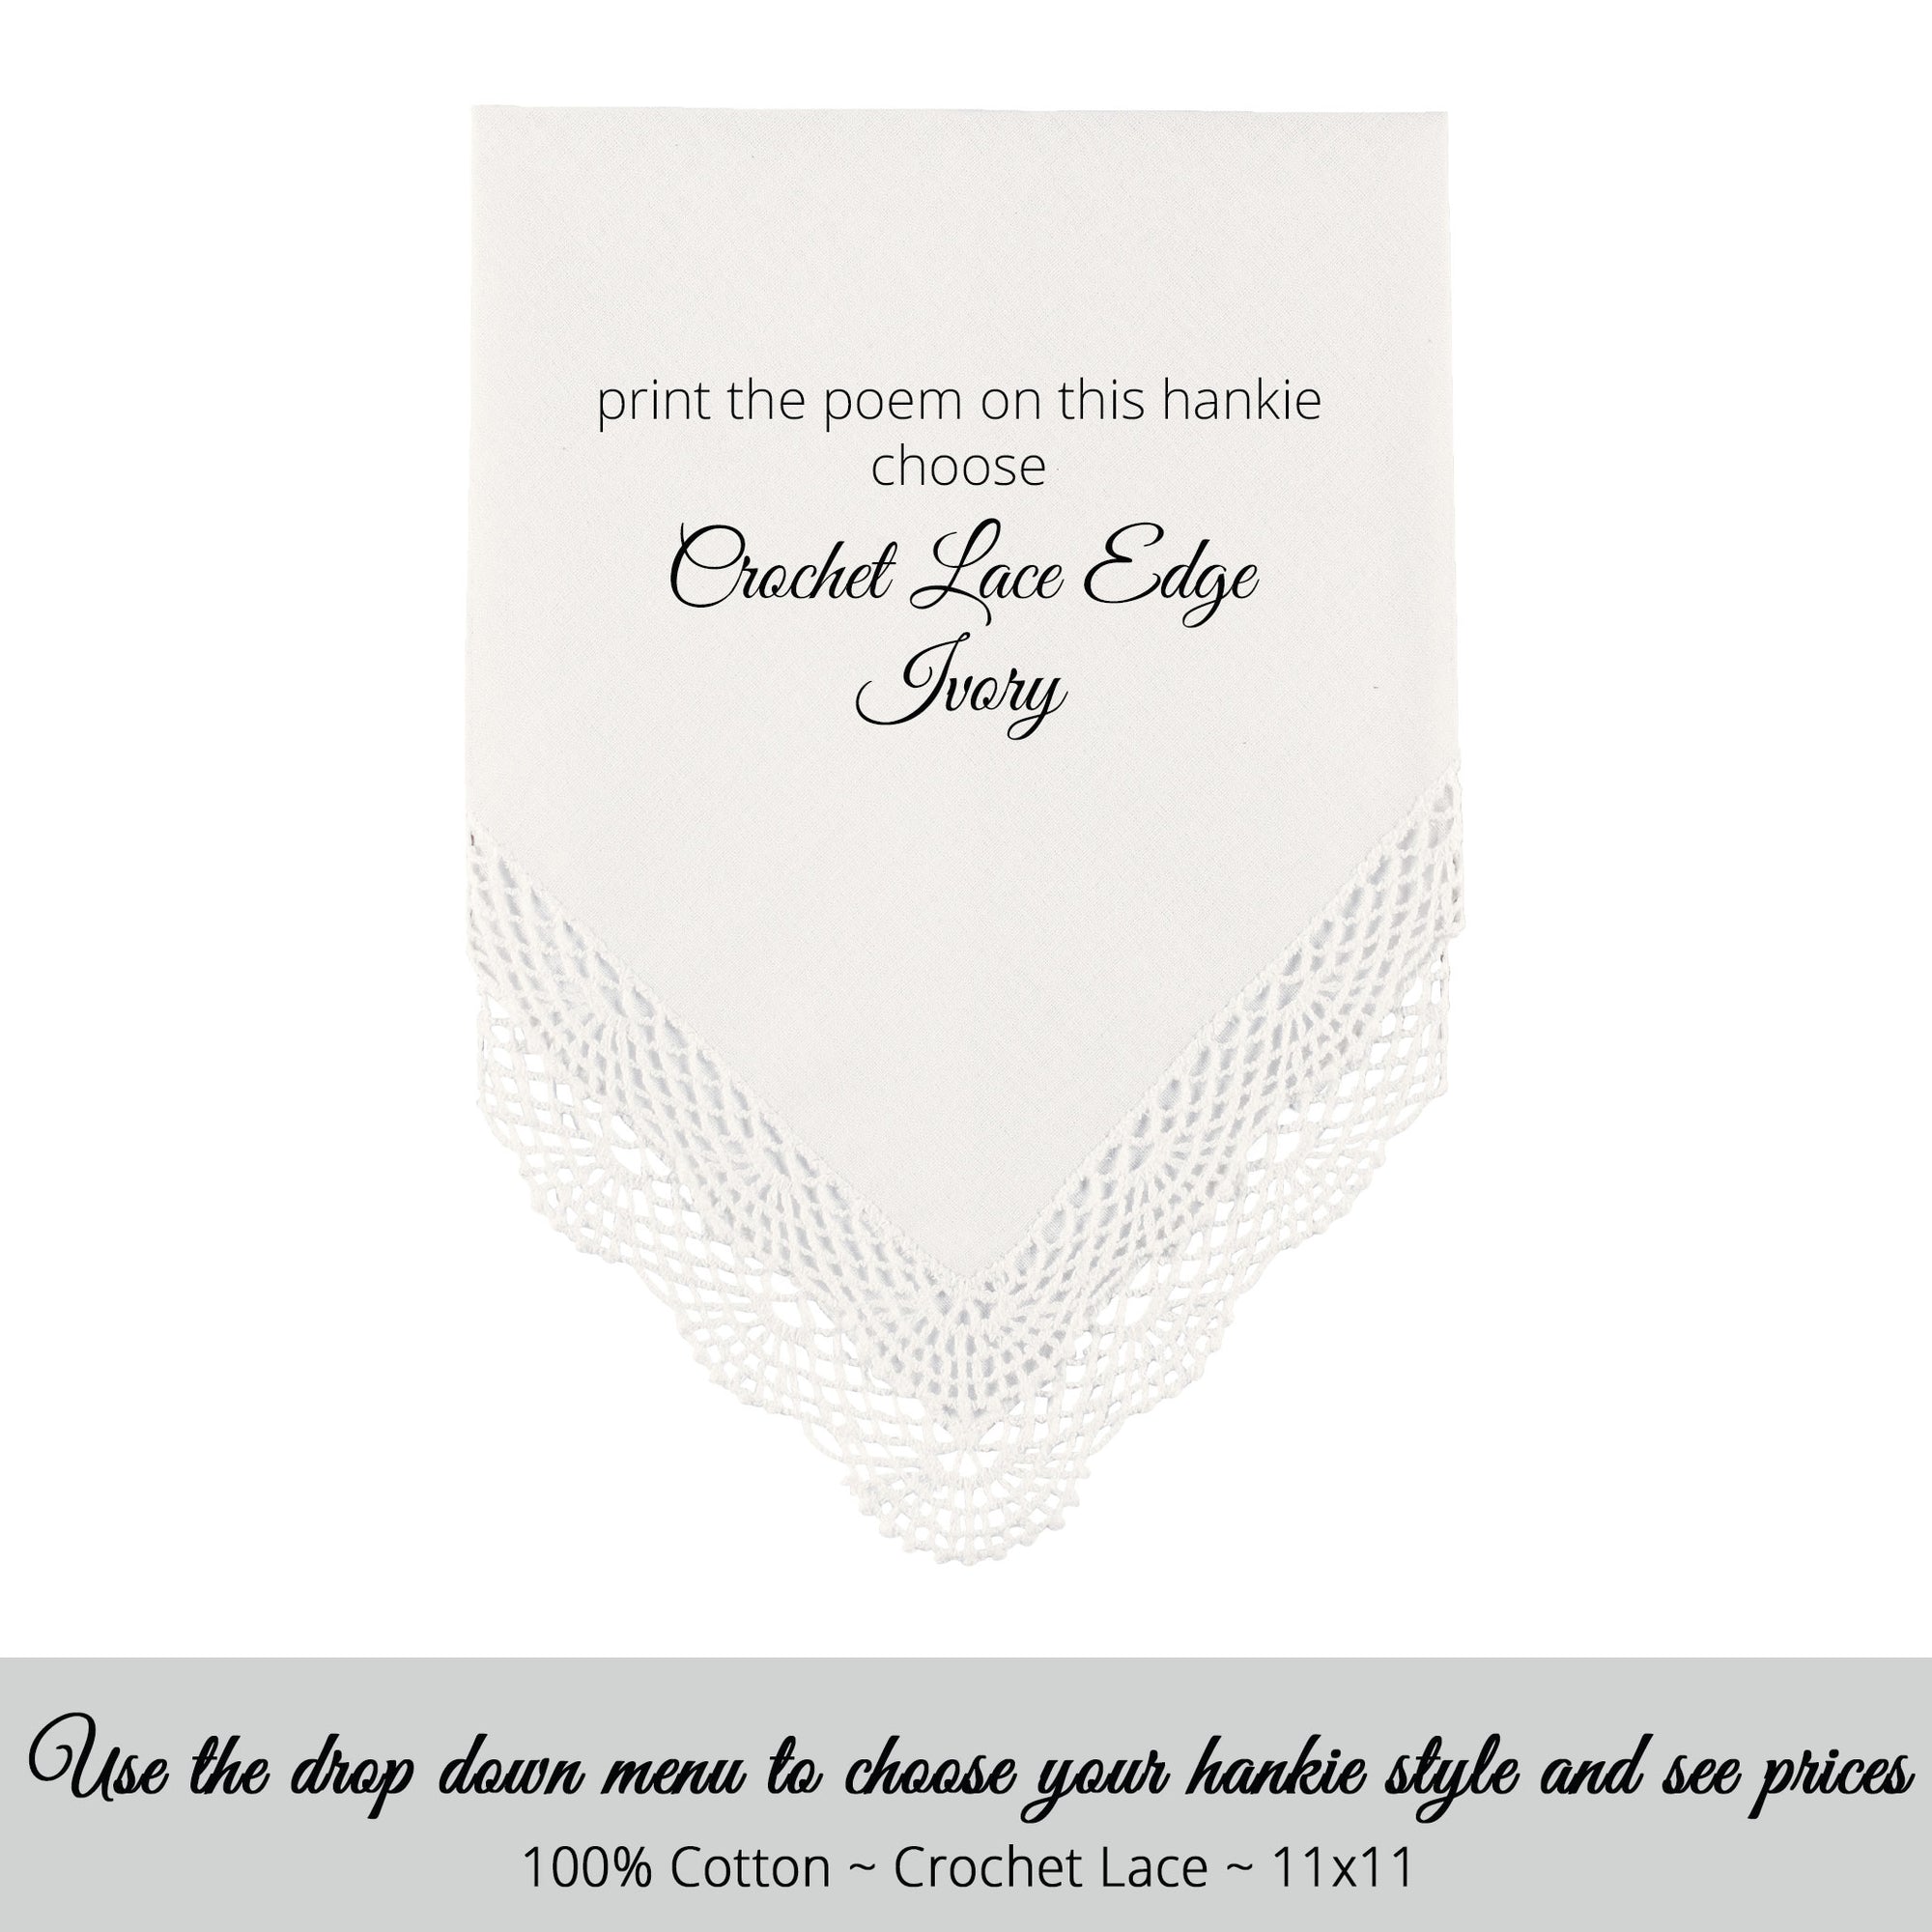 Wedding handkerchief ivory with crochet lace edge for a poem printed hankie